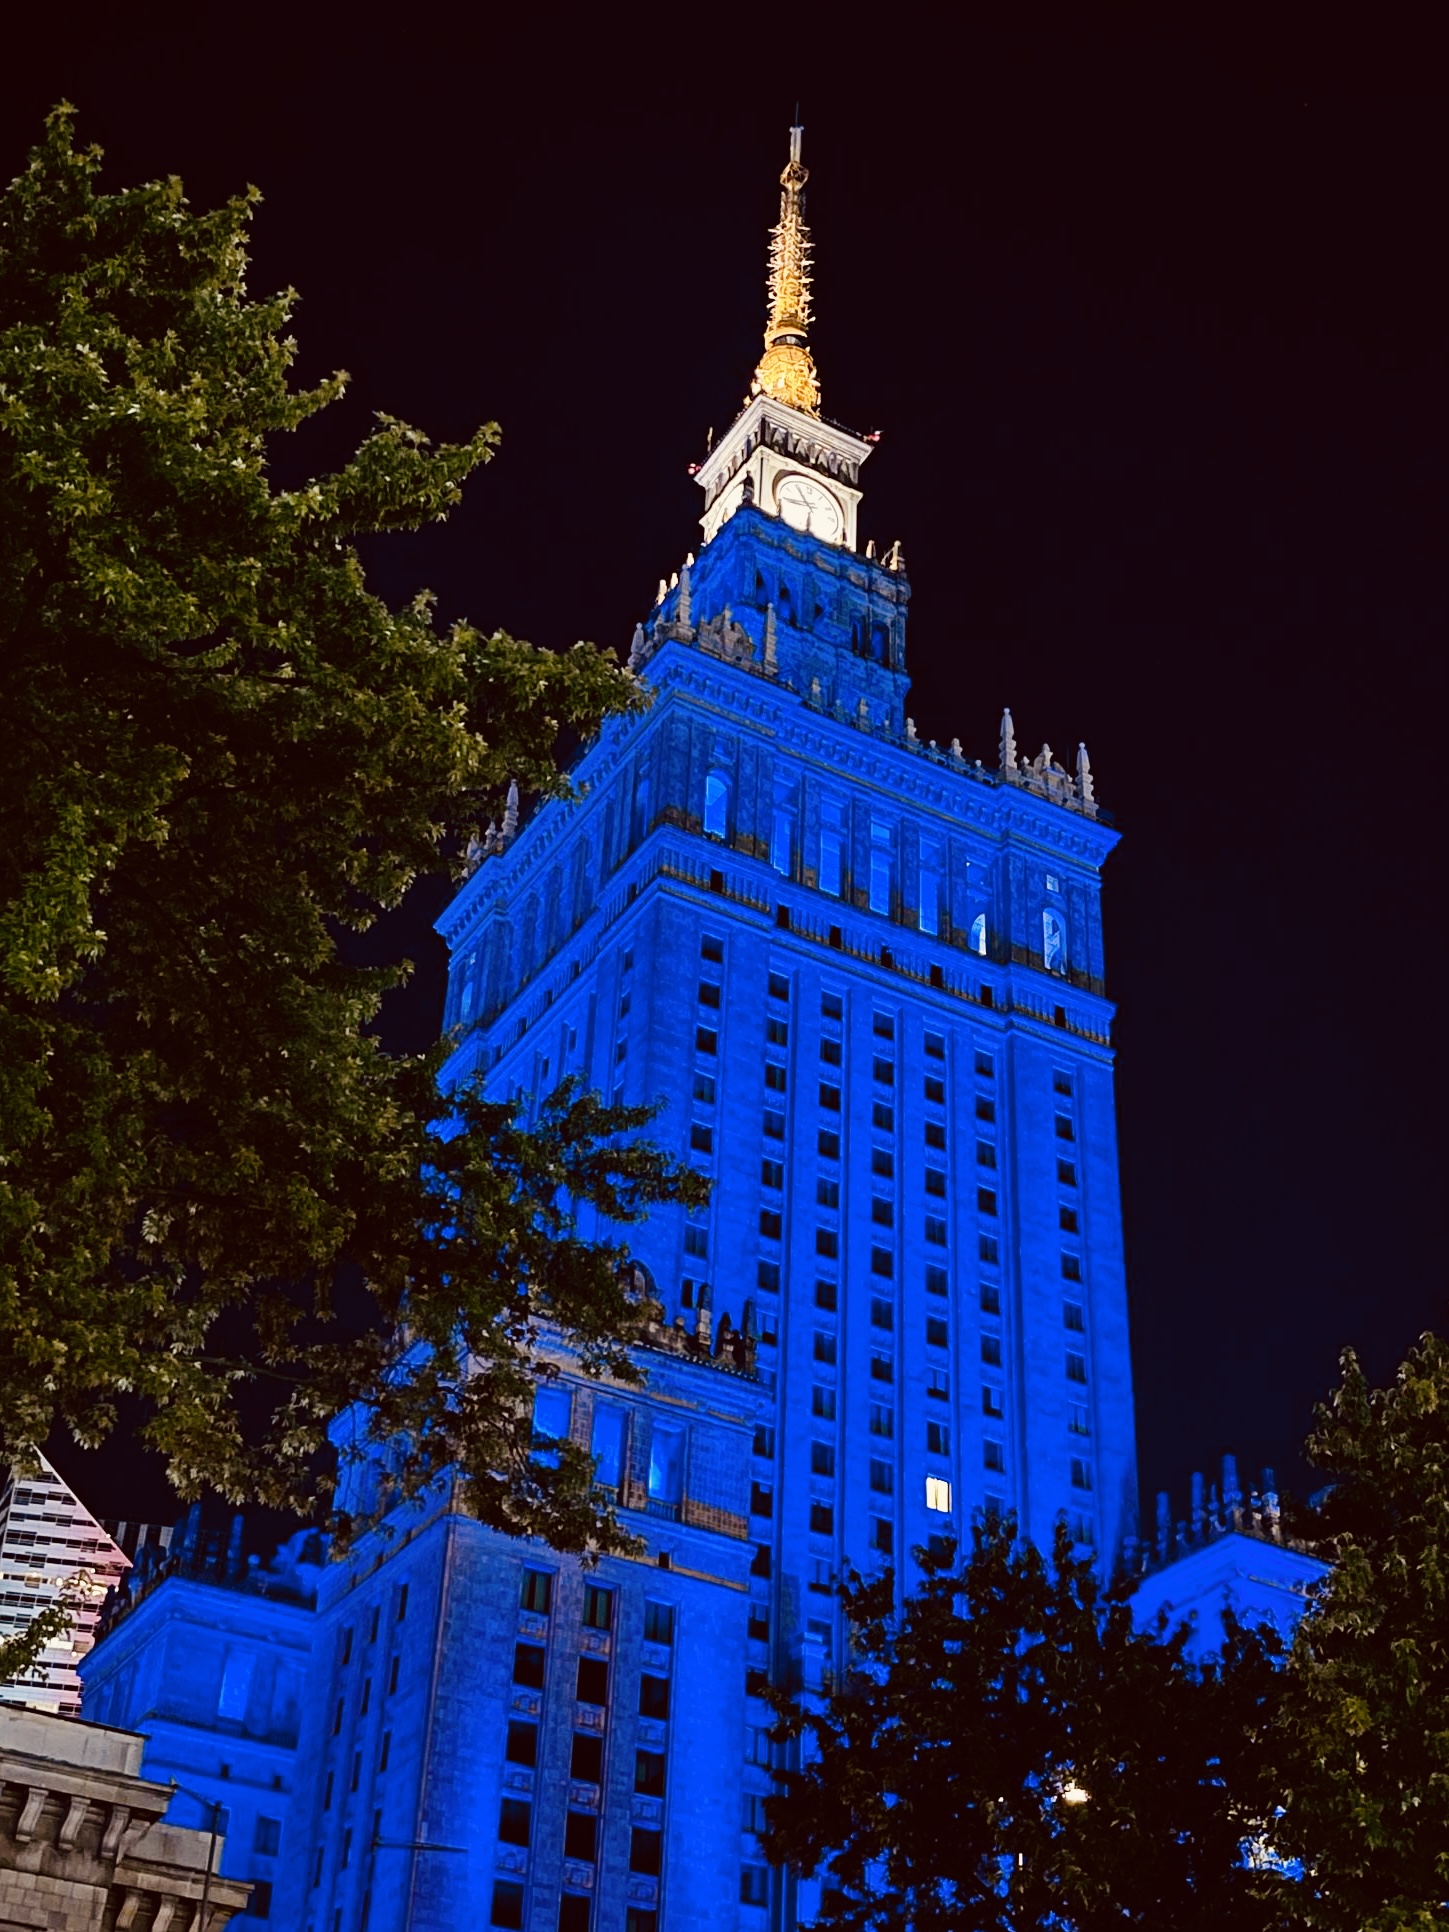 A high rise building lit up in blue with a white point